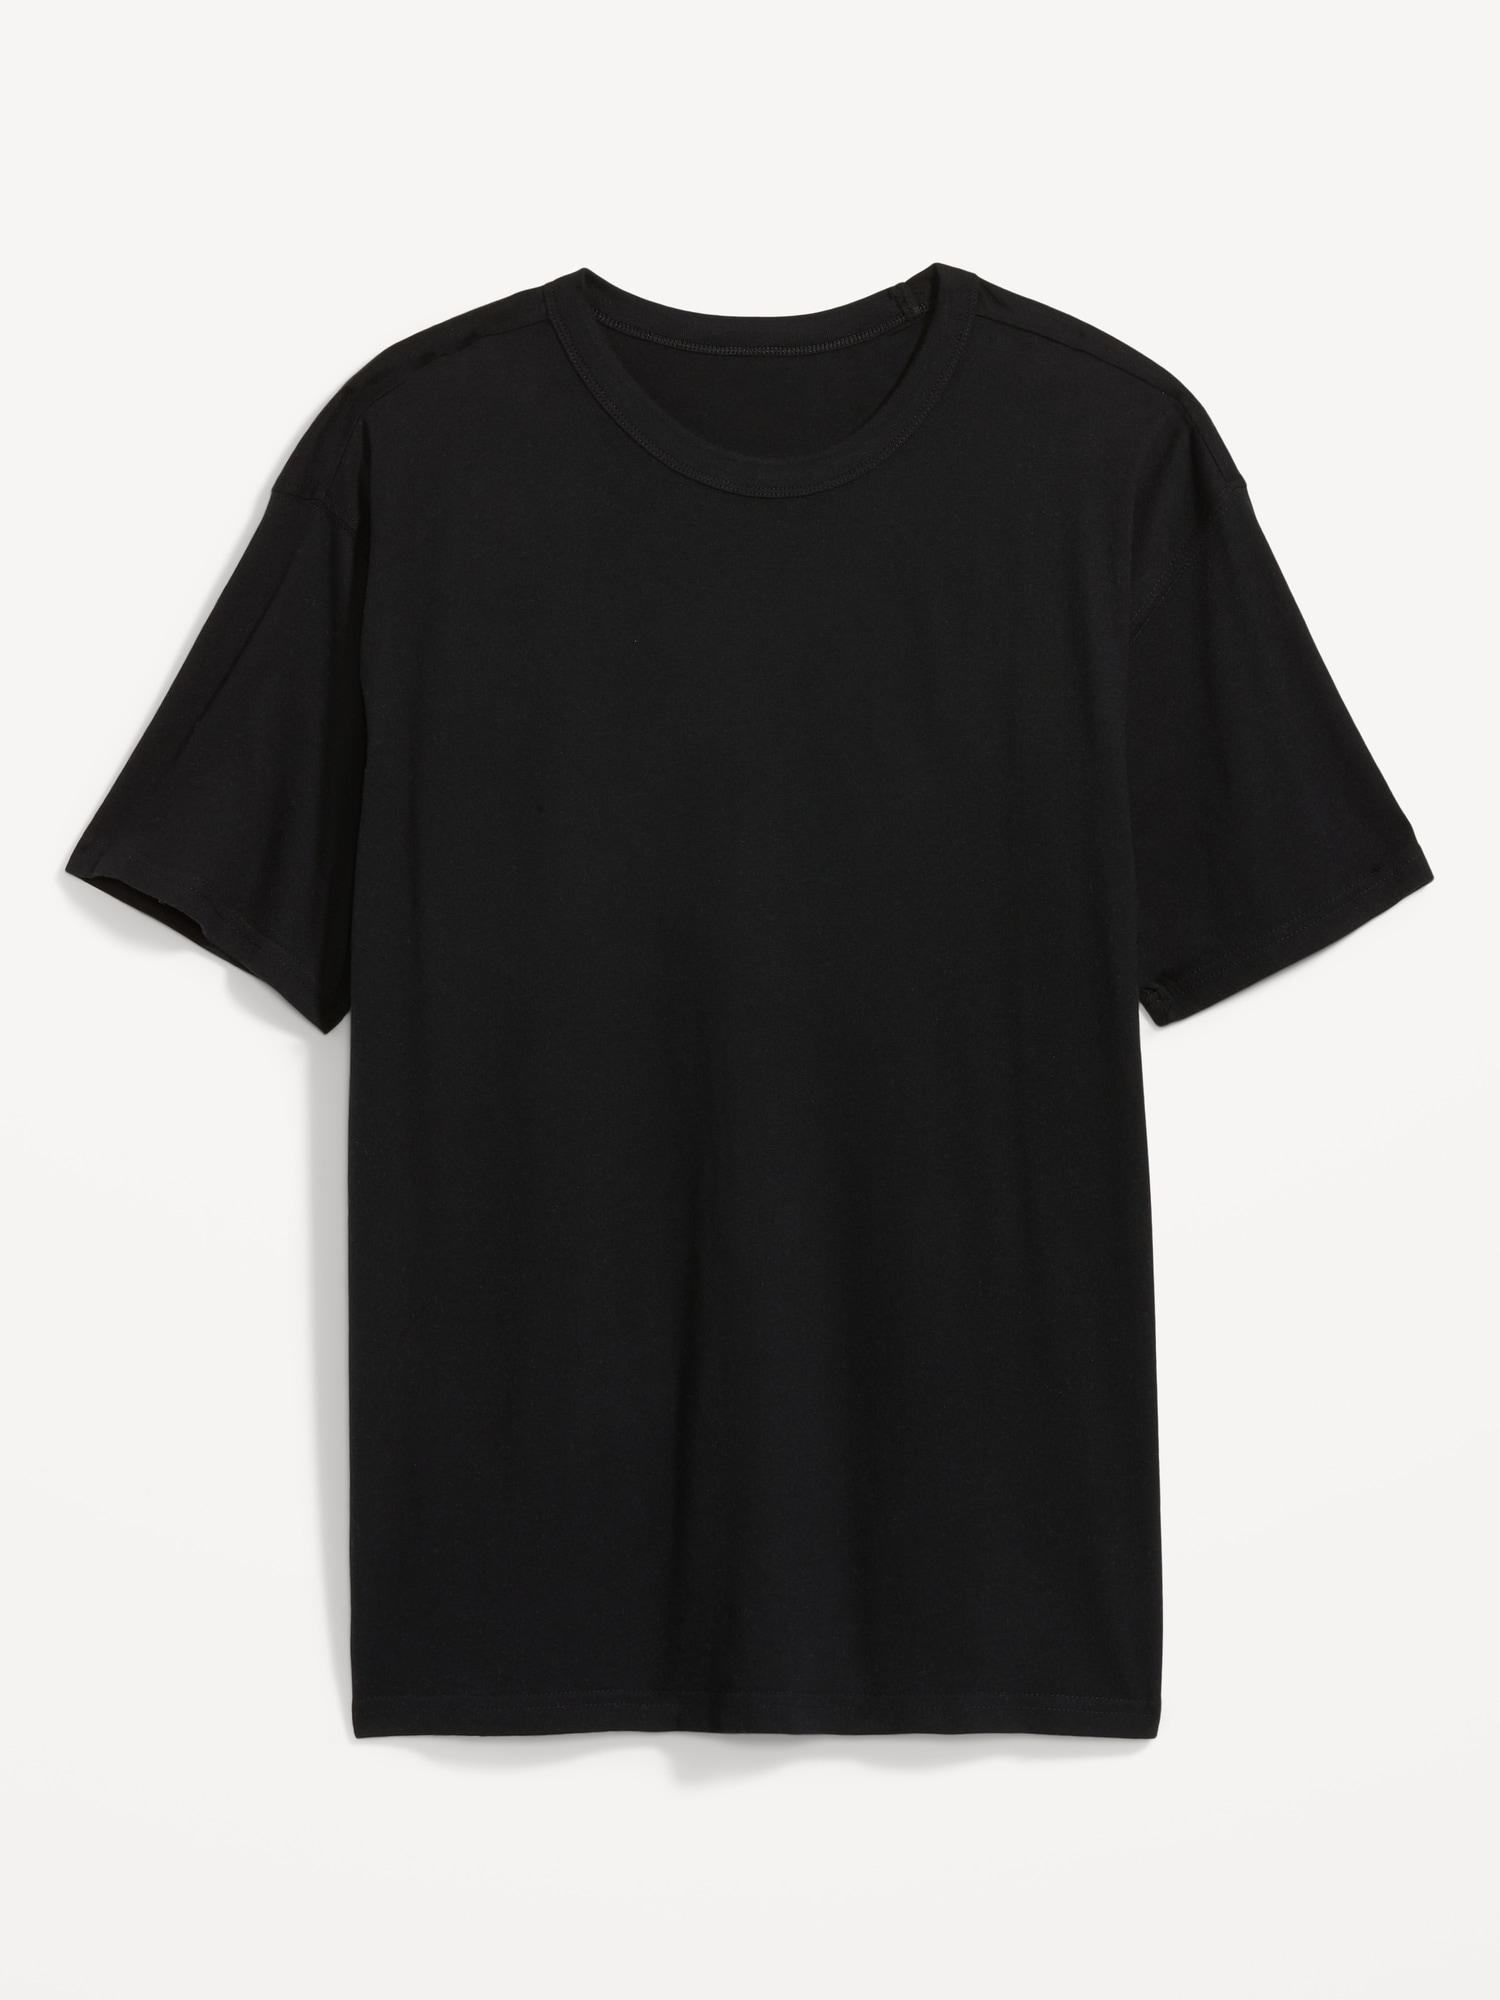 Loose-Fit Crew-Neck T-Shirt